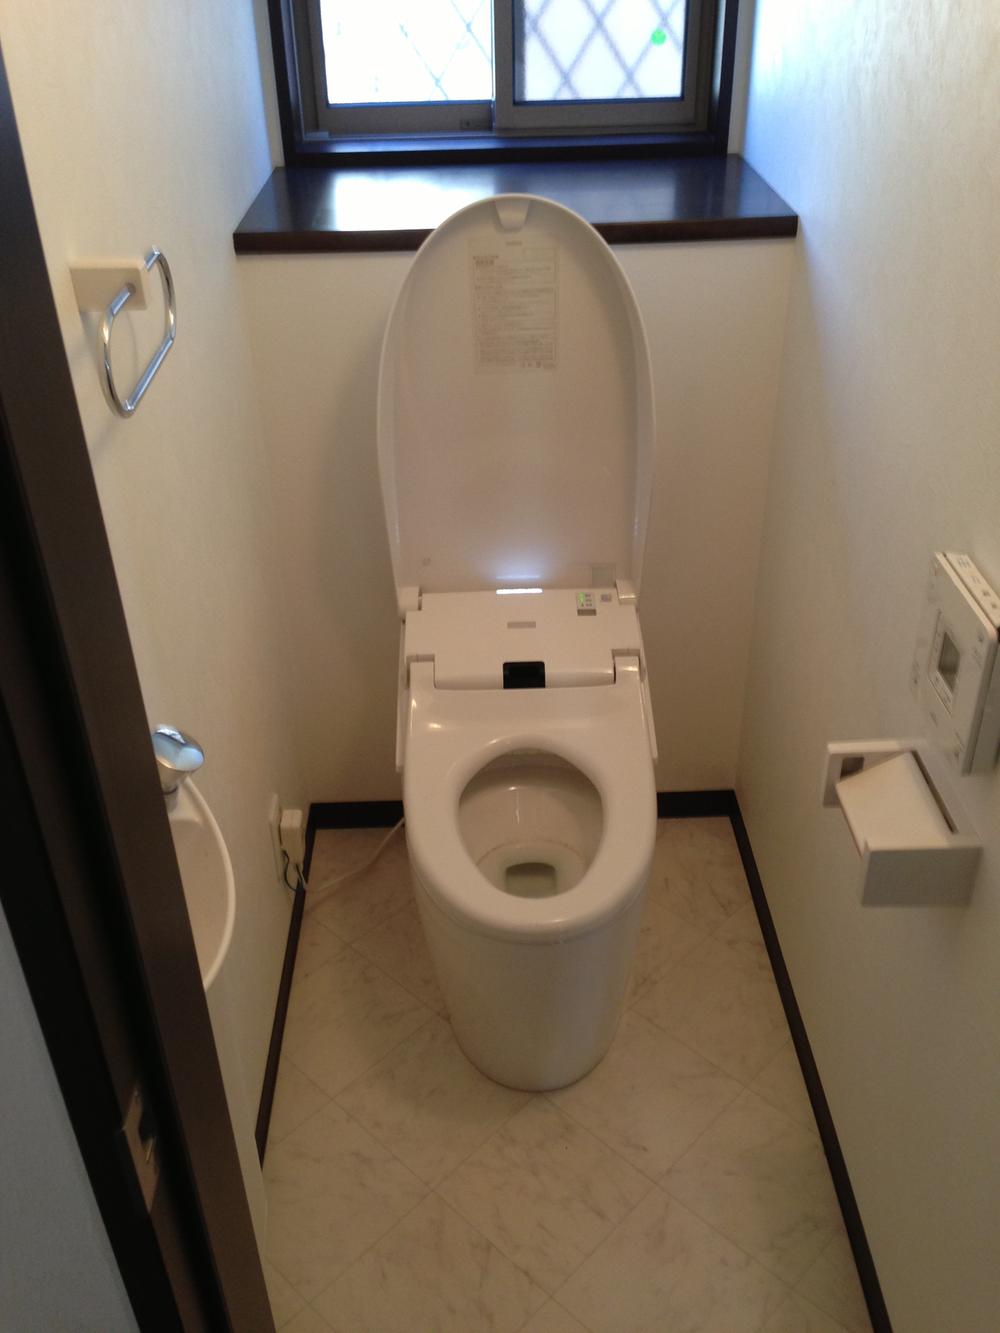 Toilet. With motion sensors